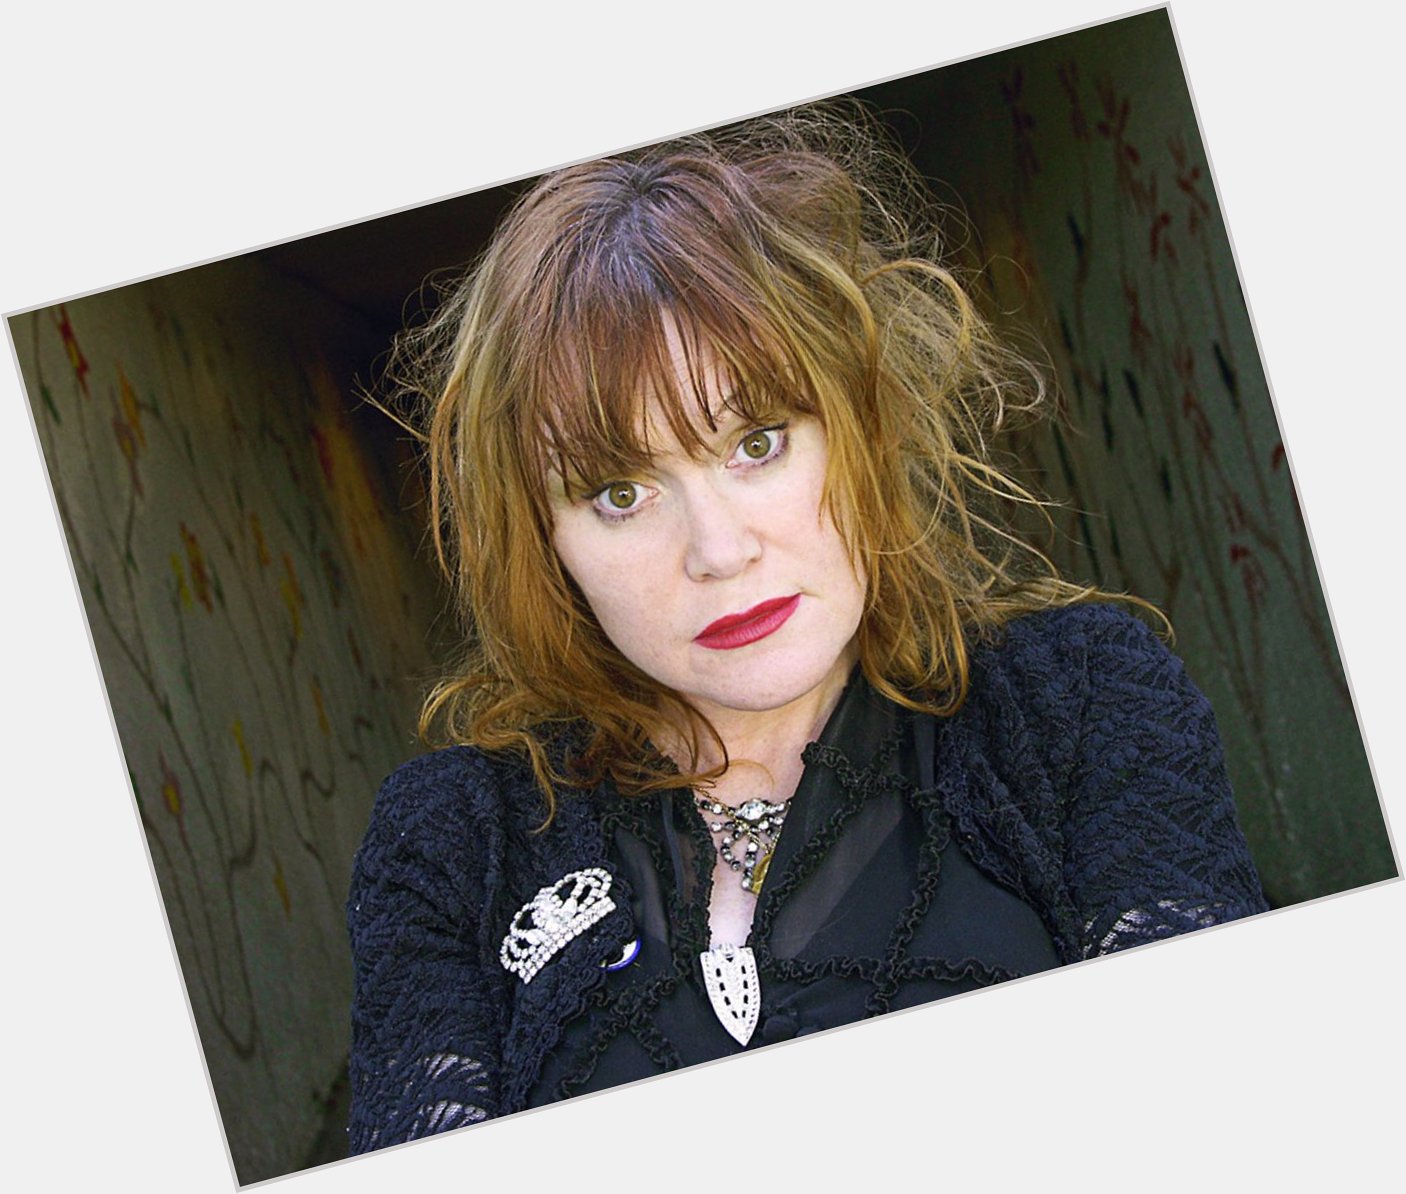 Please join me here at in wishing the one and only Exene Cervenka a very Happy Birthday today  